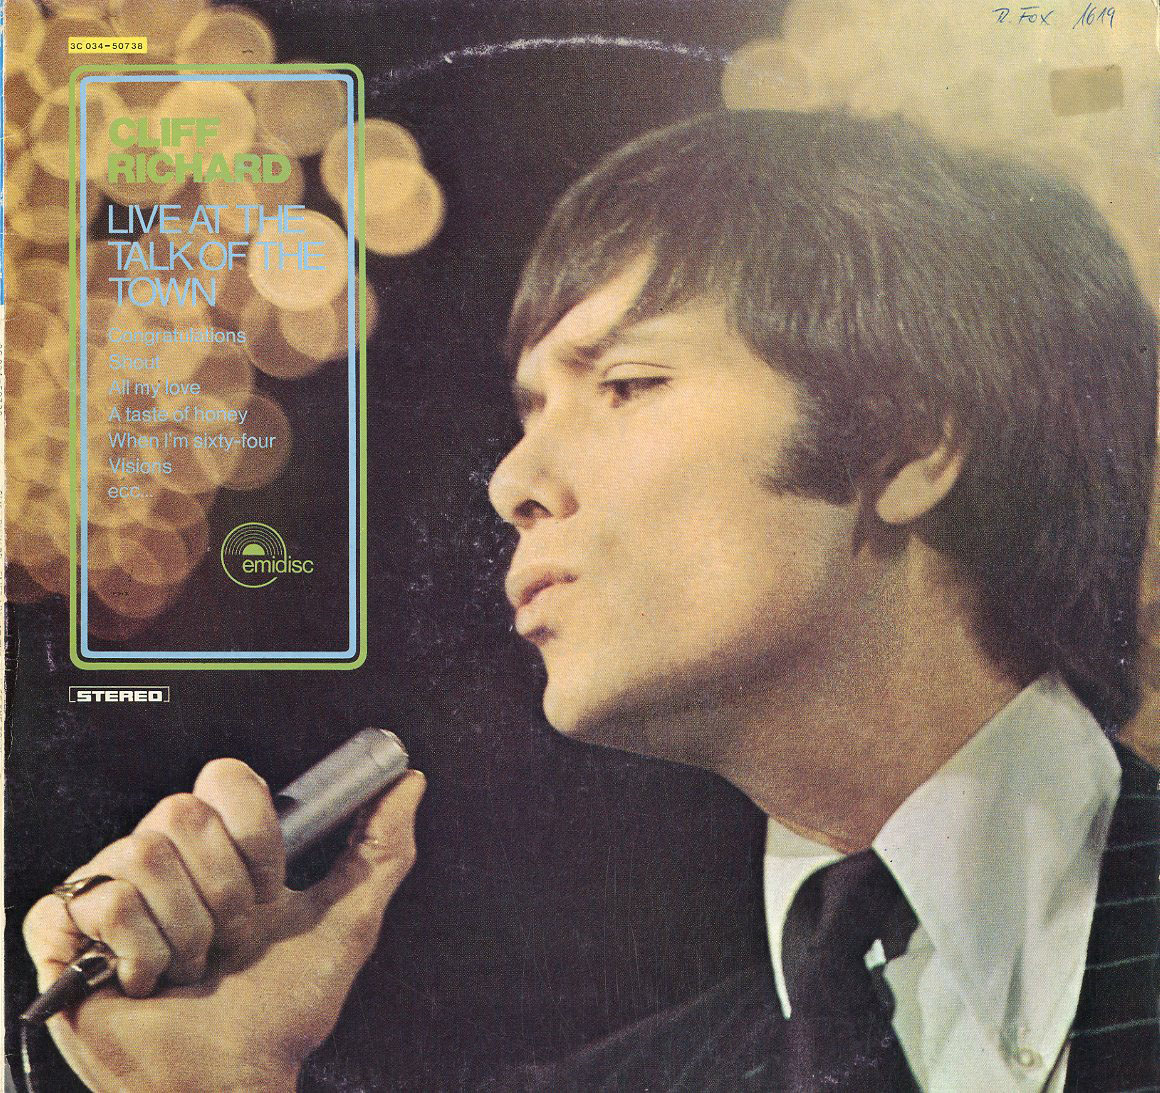 Albumcover Cliff Richard - Live At The Talk Of The Town (